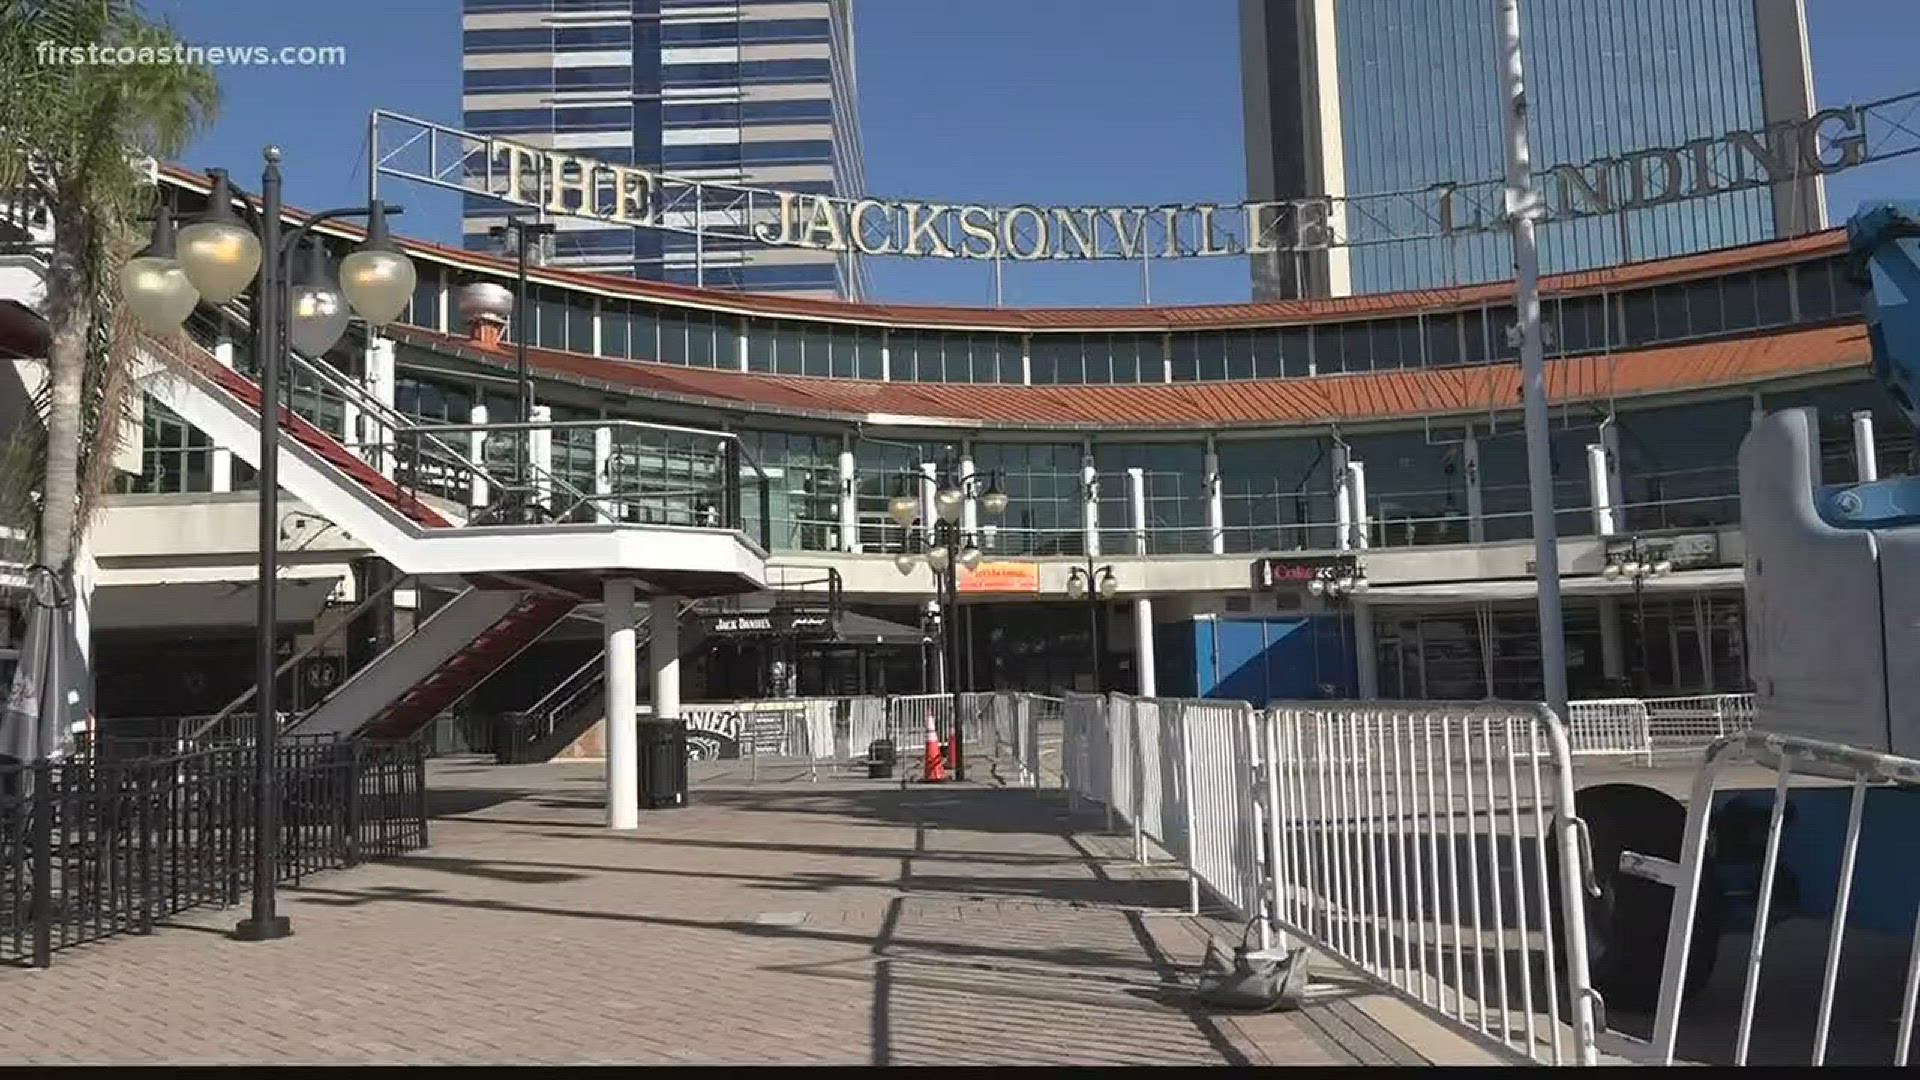 FCN's Lana Harris explores how the ending of this lease agreement will affect the businesses at the Jacksonville Landing.